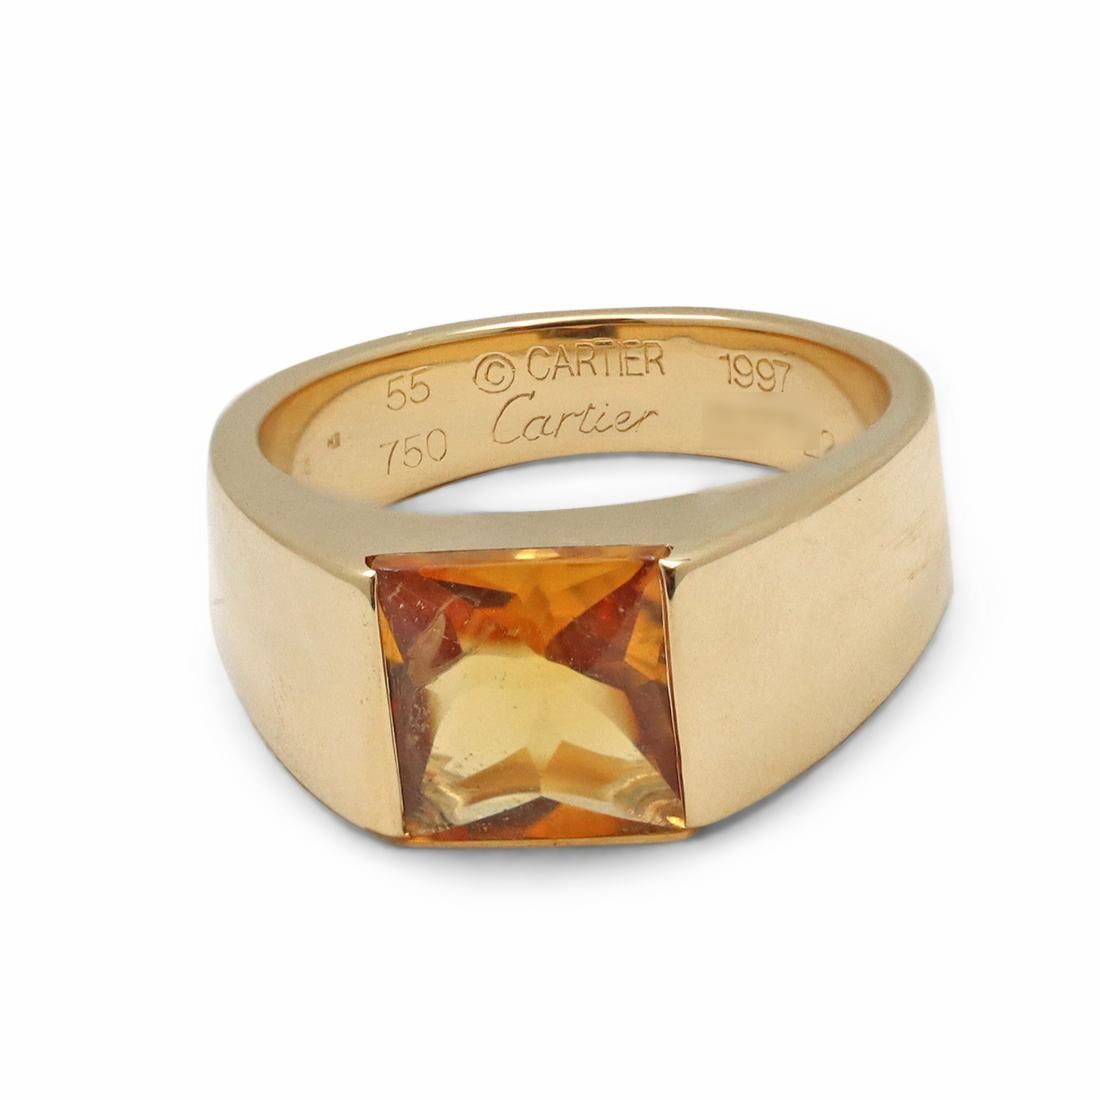 Brilliant Cut Cartier Tank Yellow Gold and Citrine Ring